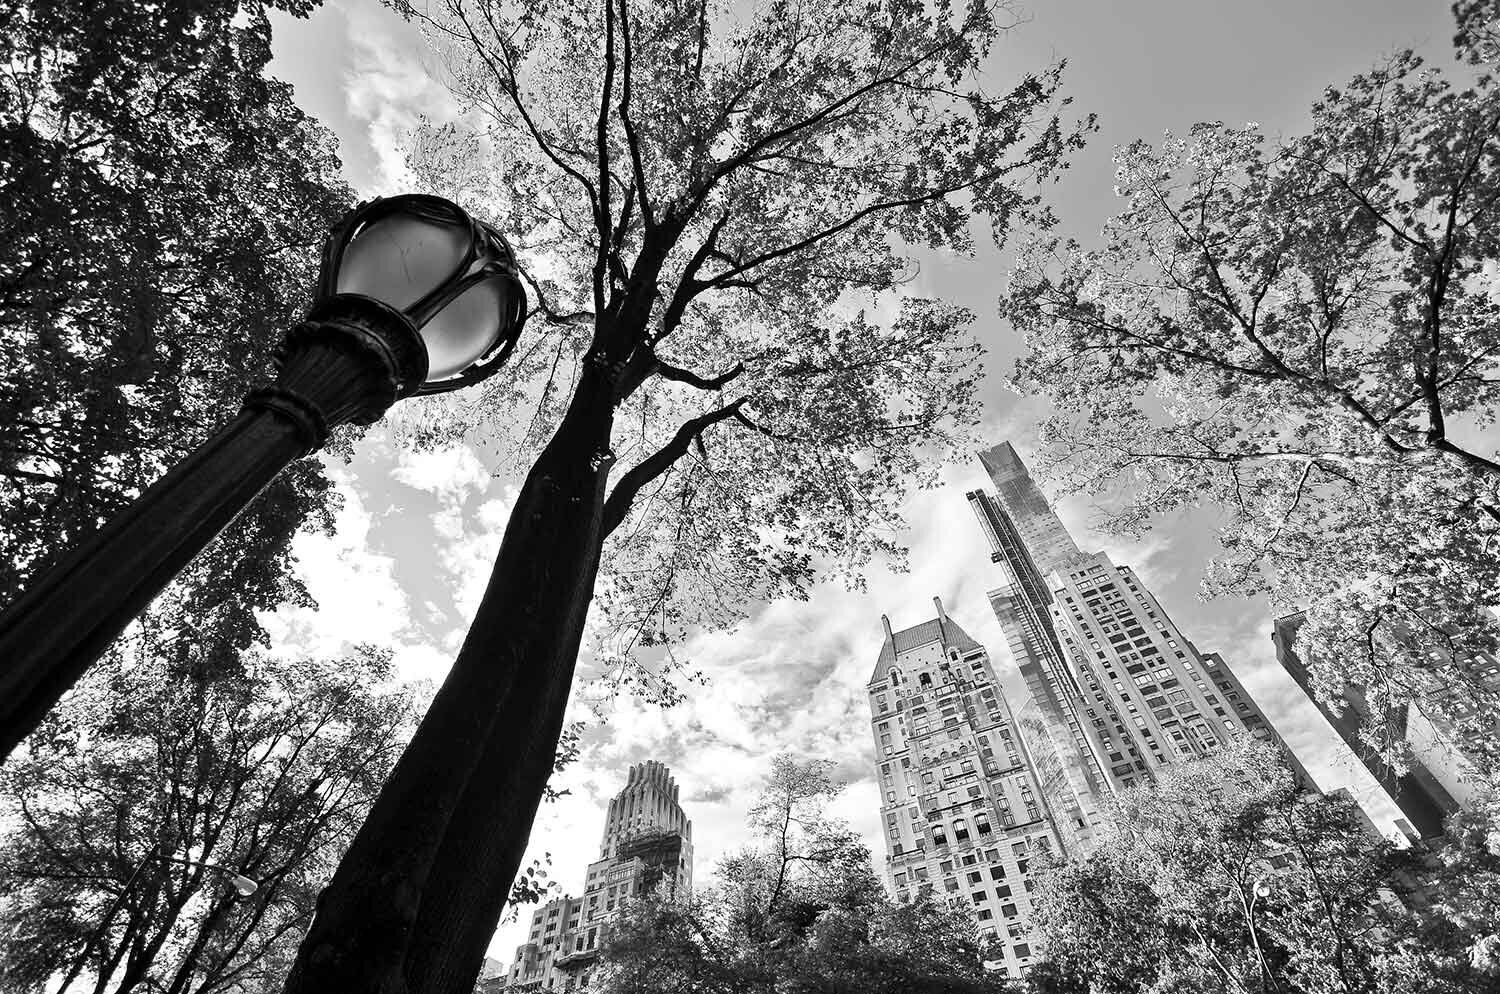 Black and white image of NYC streetlight, trees, and buildings